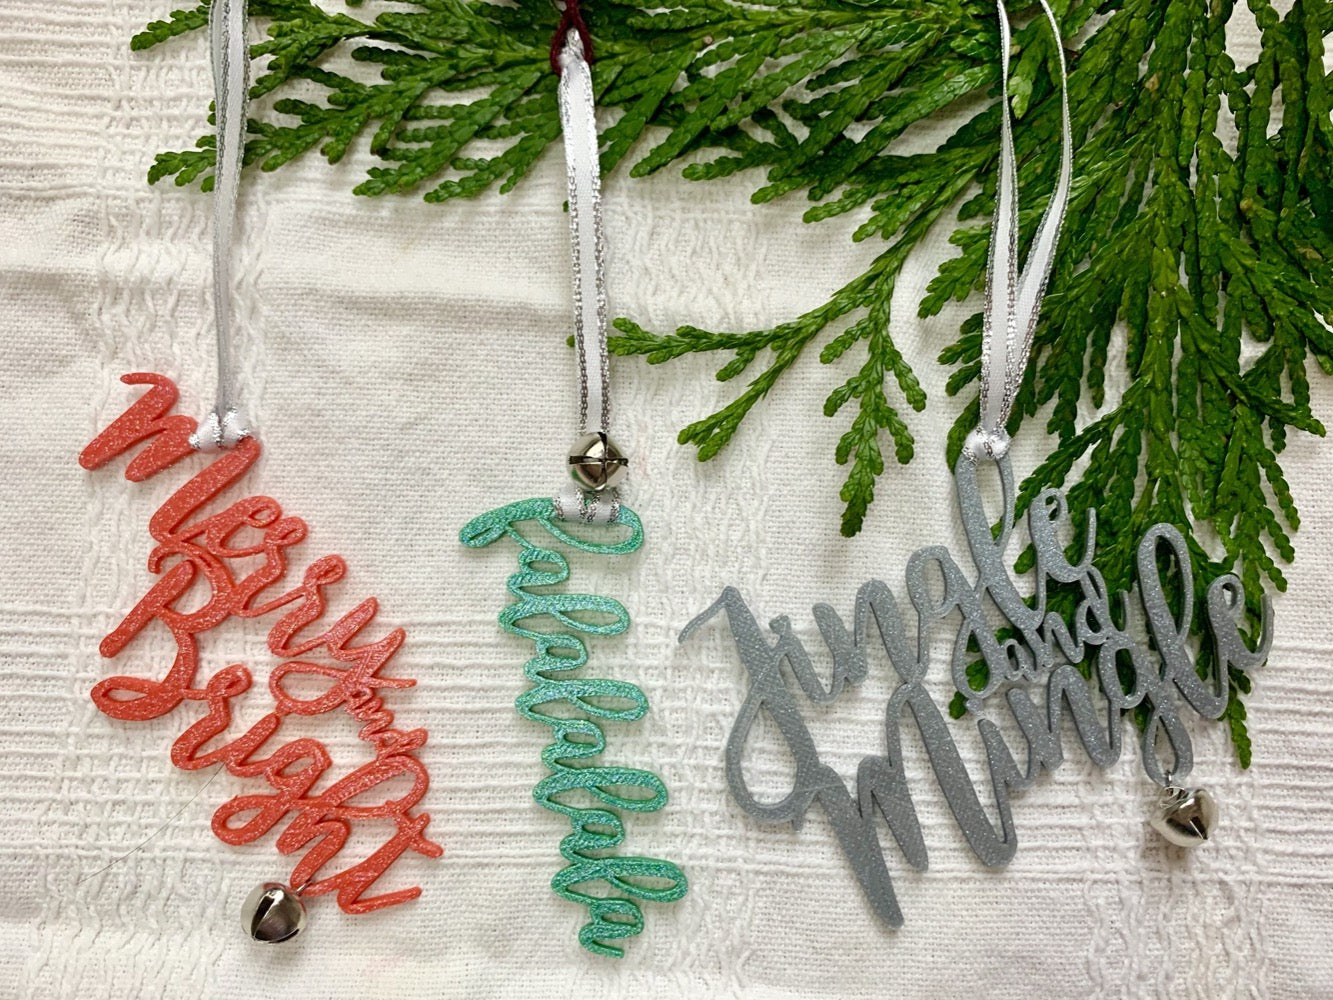 On a white fabric background there are three R+D 3D printed ornaments hanging from an evergreen branch. Each is in a cursive font and have a jingle bell attached. There are in red, green or silver colors and read "Merry and Bright", "falalalala", and "Jingle and Mingle"